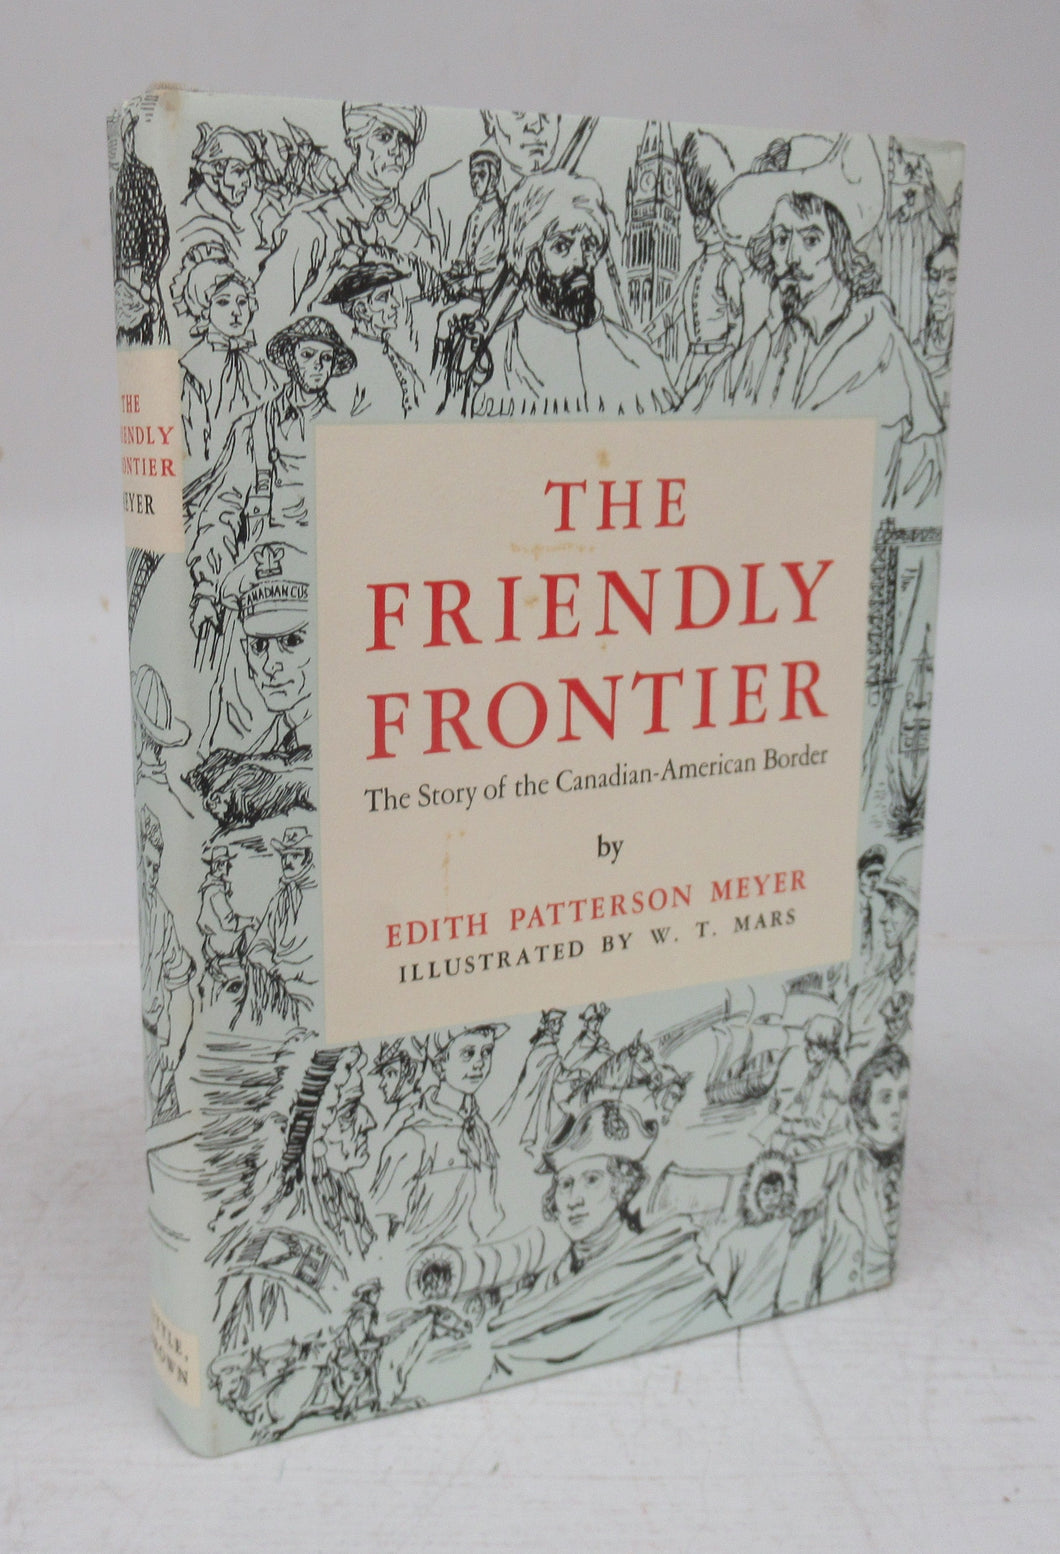 The Friendly Frontier: The Story of the Canadian-American Border